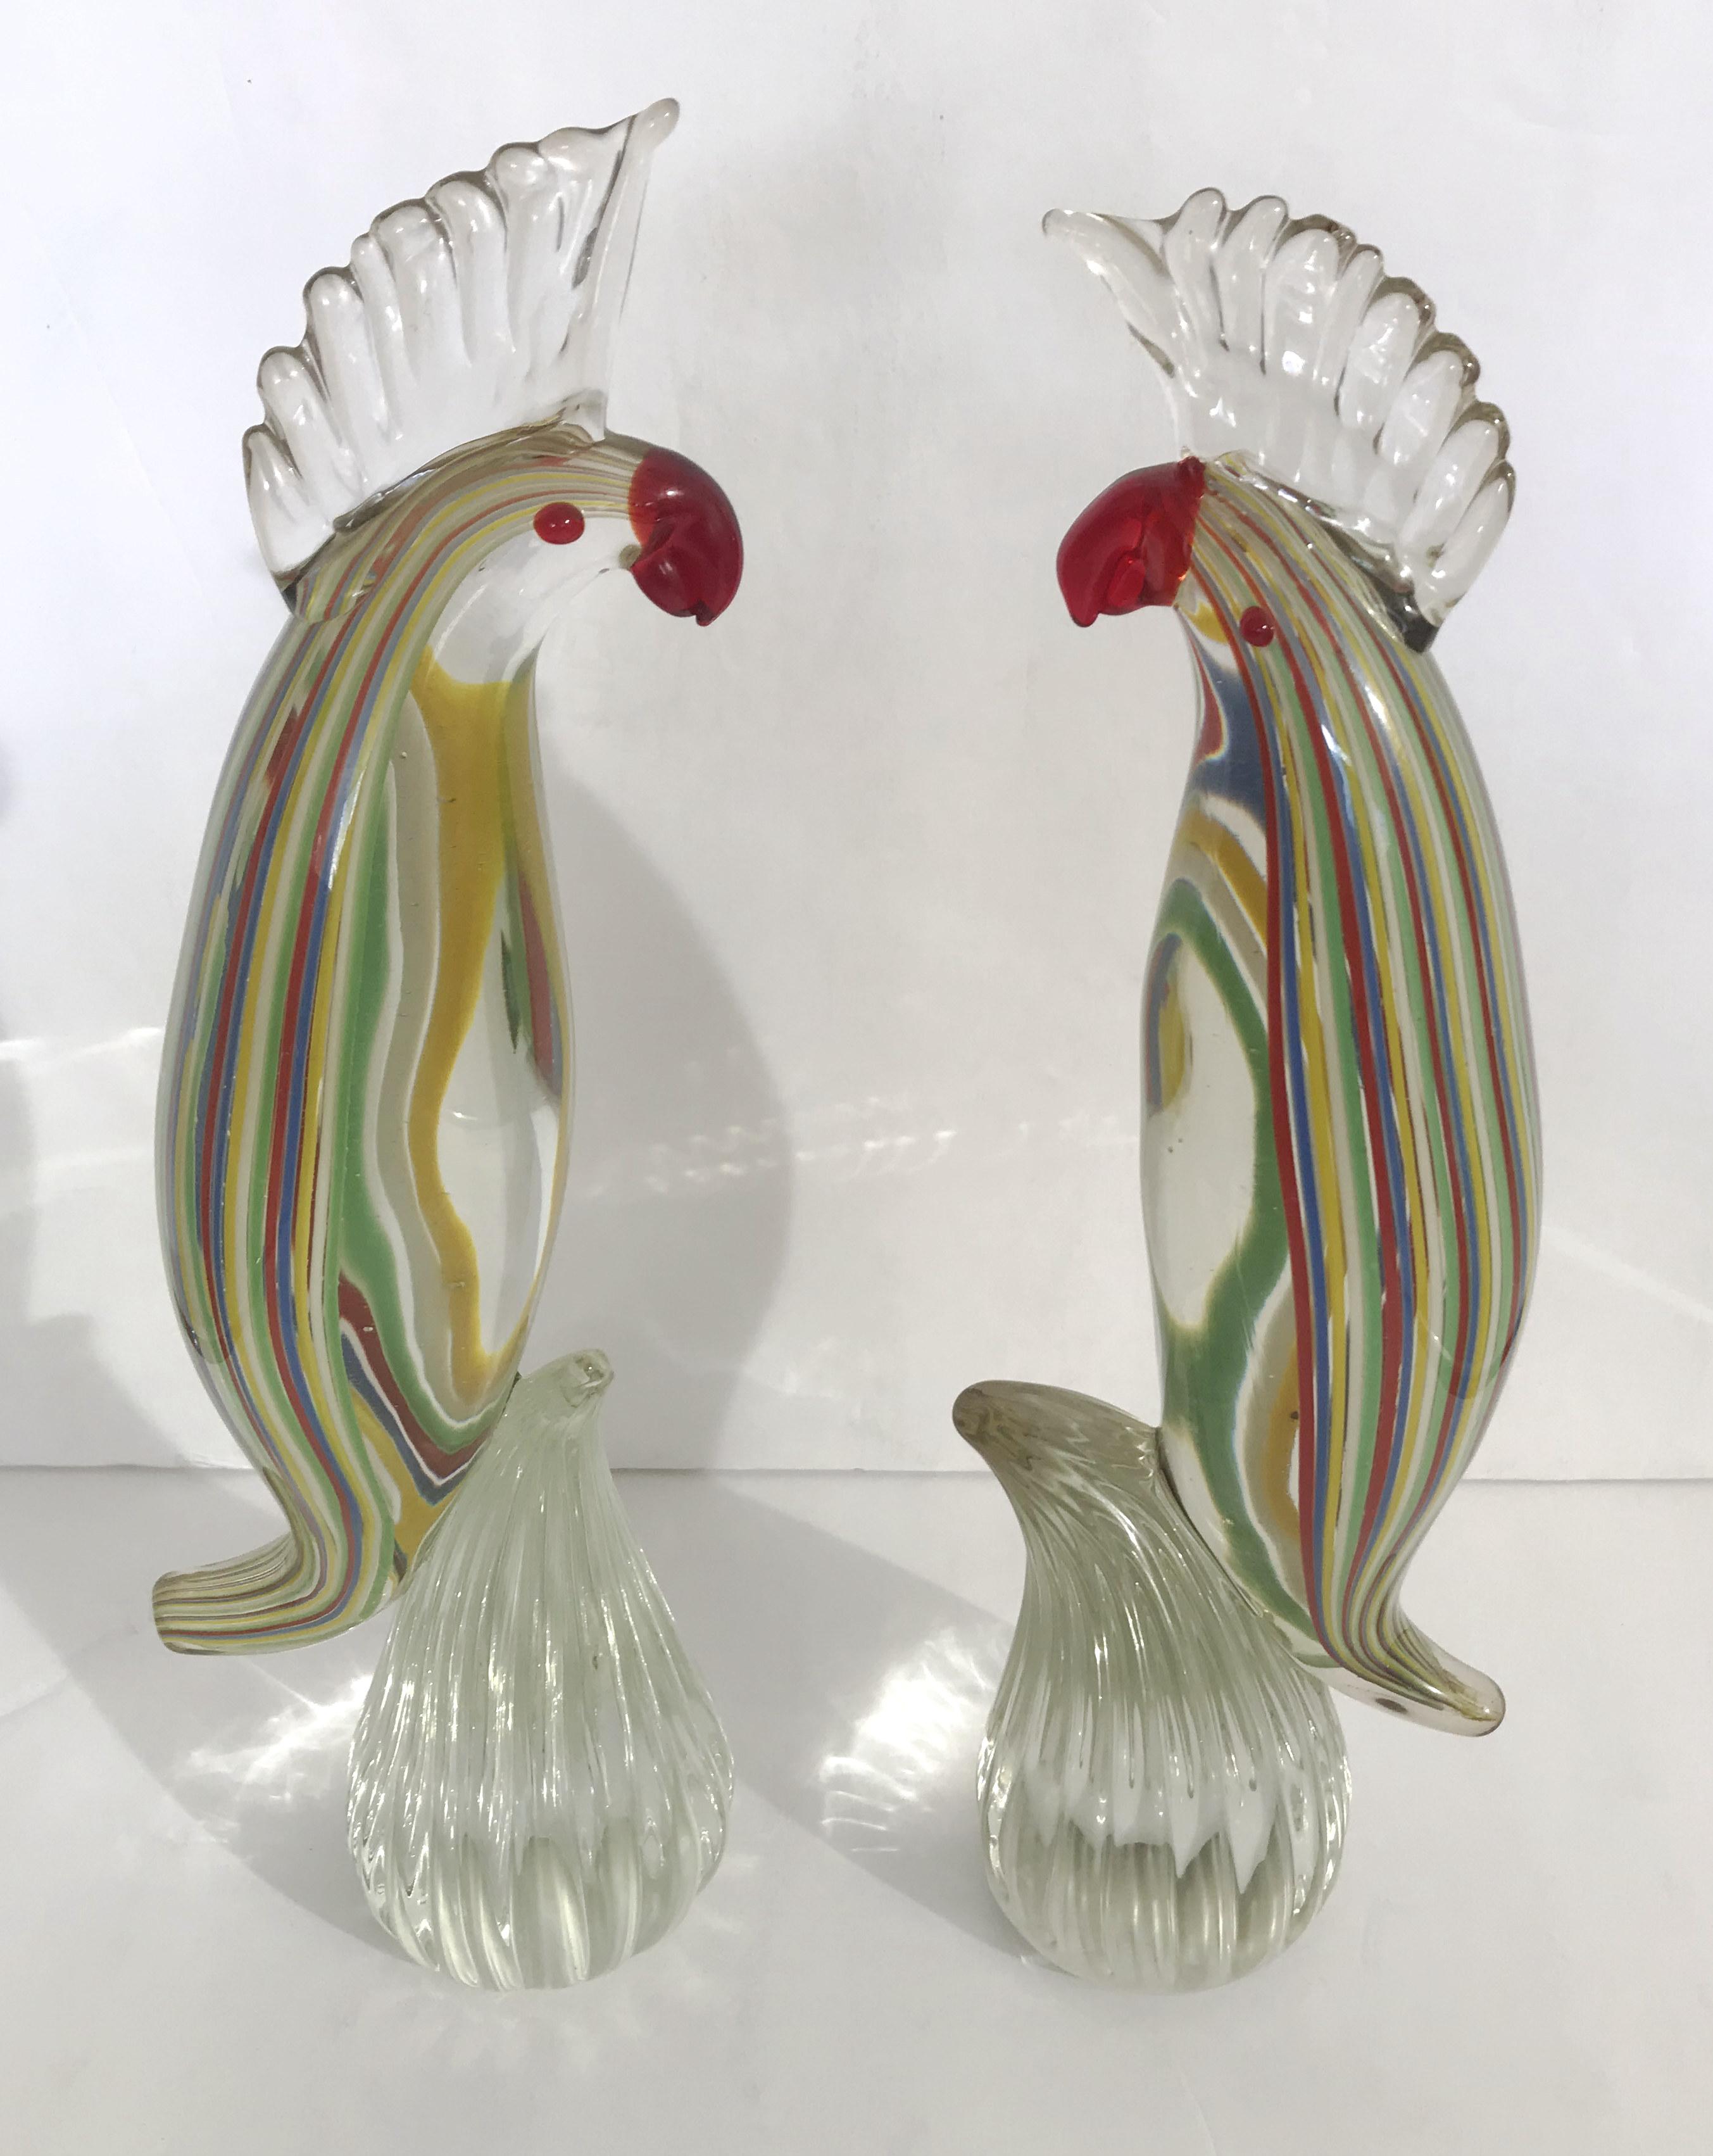 Pair of vintage cockatoo sculptures hand blown in clear Murano glass with beautiful multicolored stripes / Made in Italy, circa 1960s
Measures: height 12.5 inches, diameter 4 inches
1 set in stock in Palm Springs currently ON HOLIDAY SALE for $999